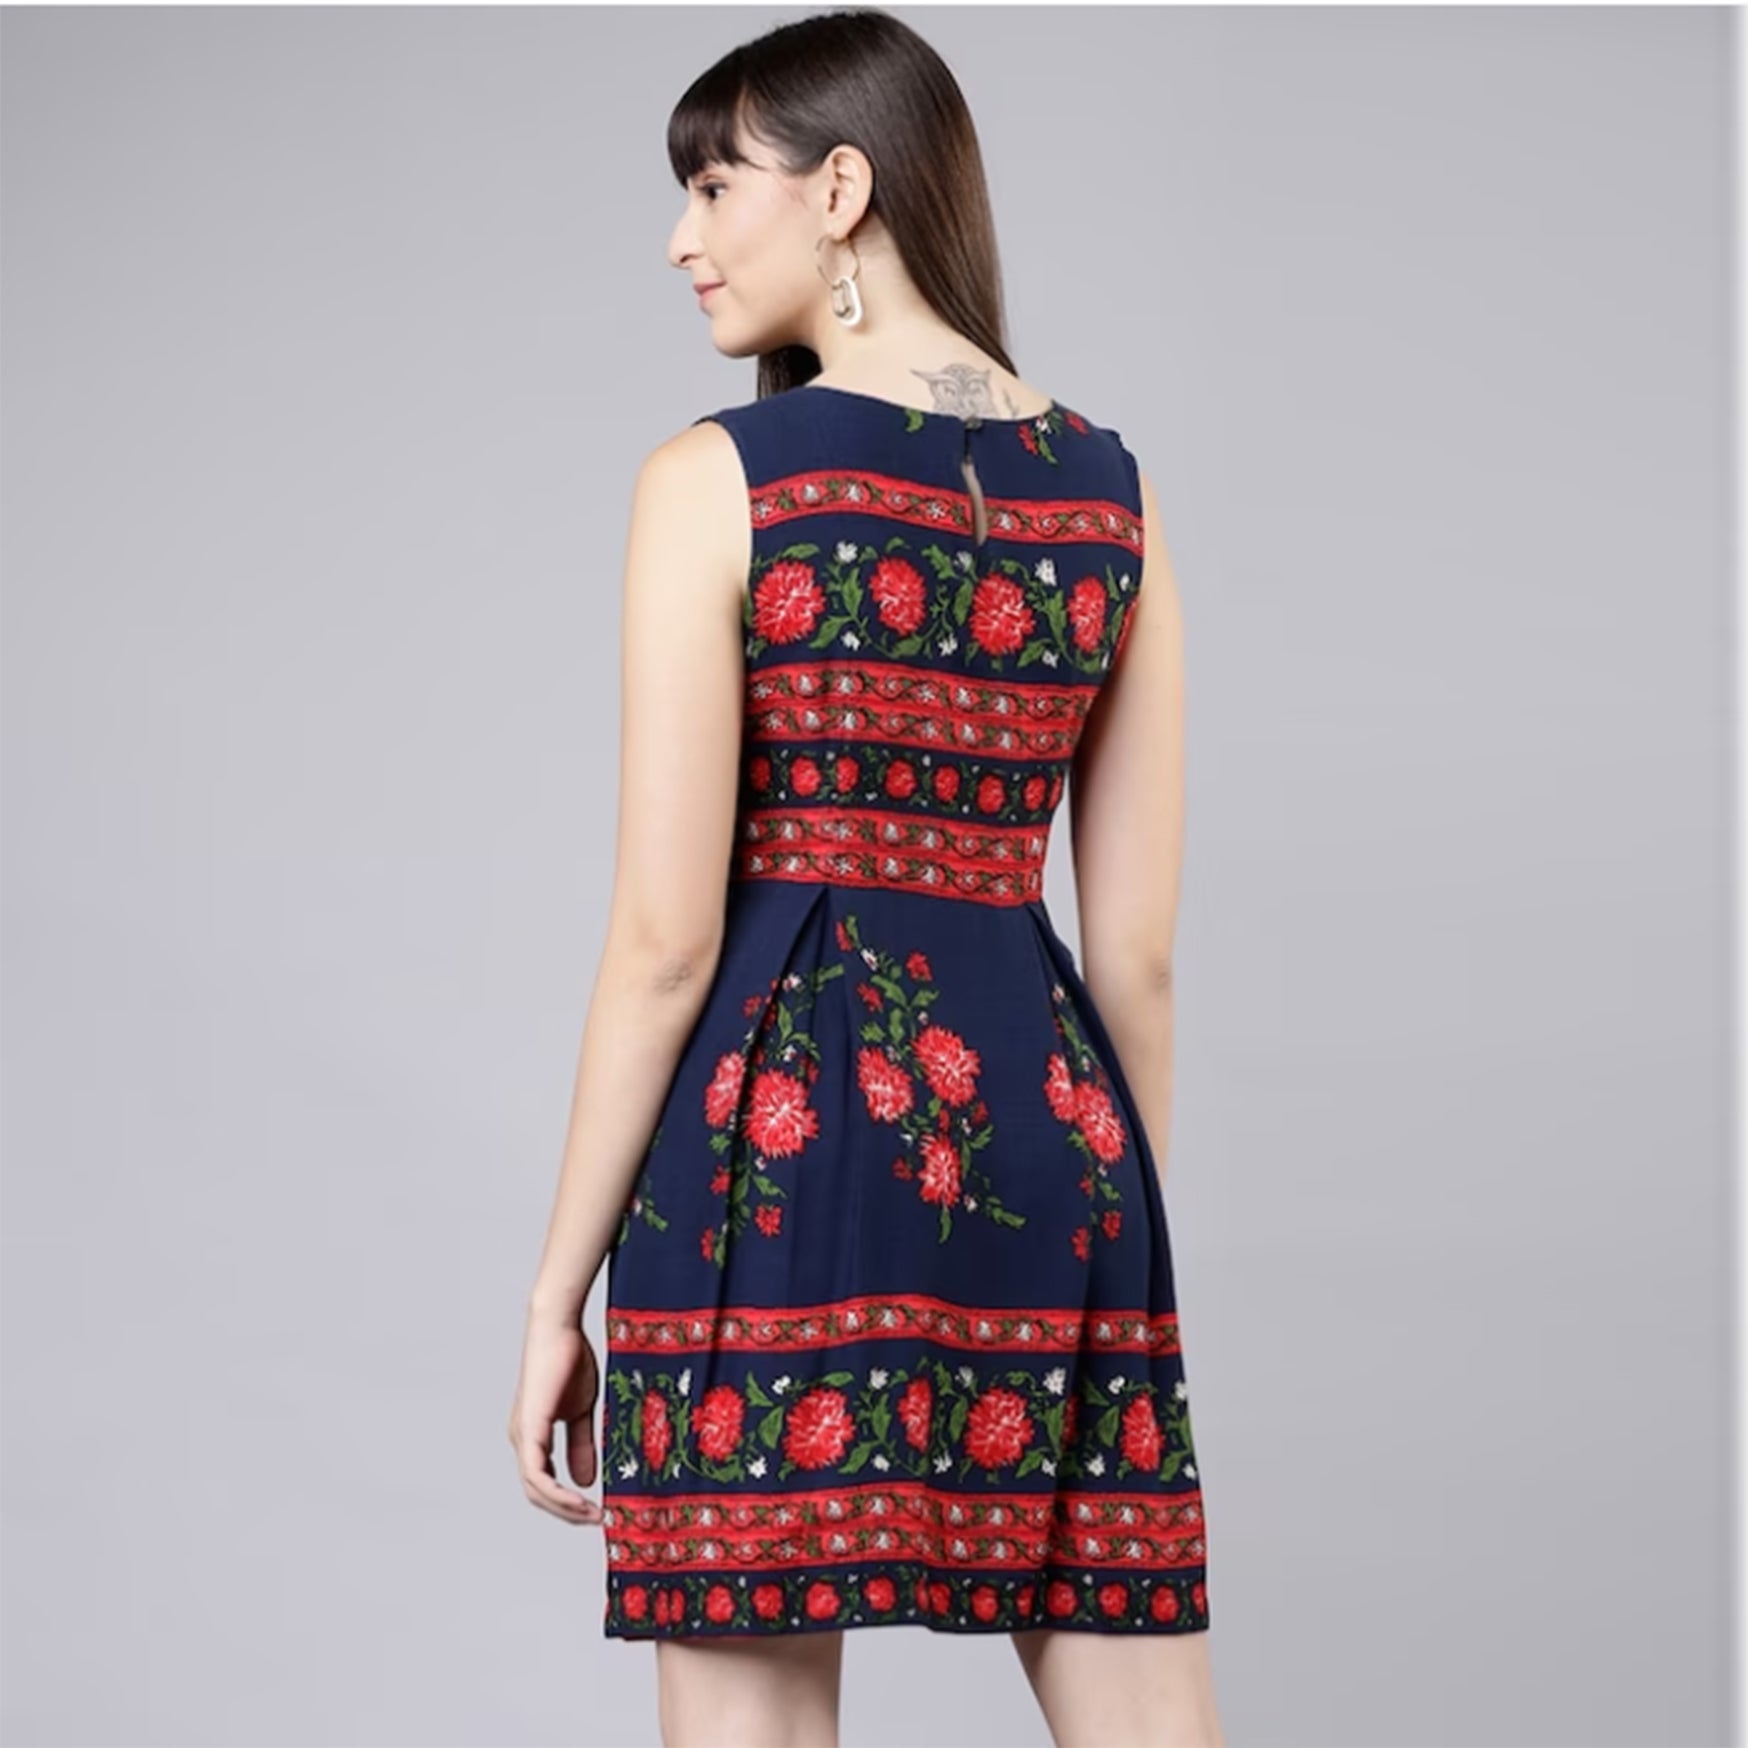 Navy Blue Floral Printed Fit and Flare Dress